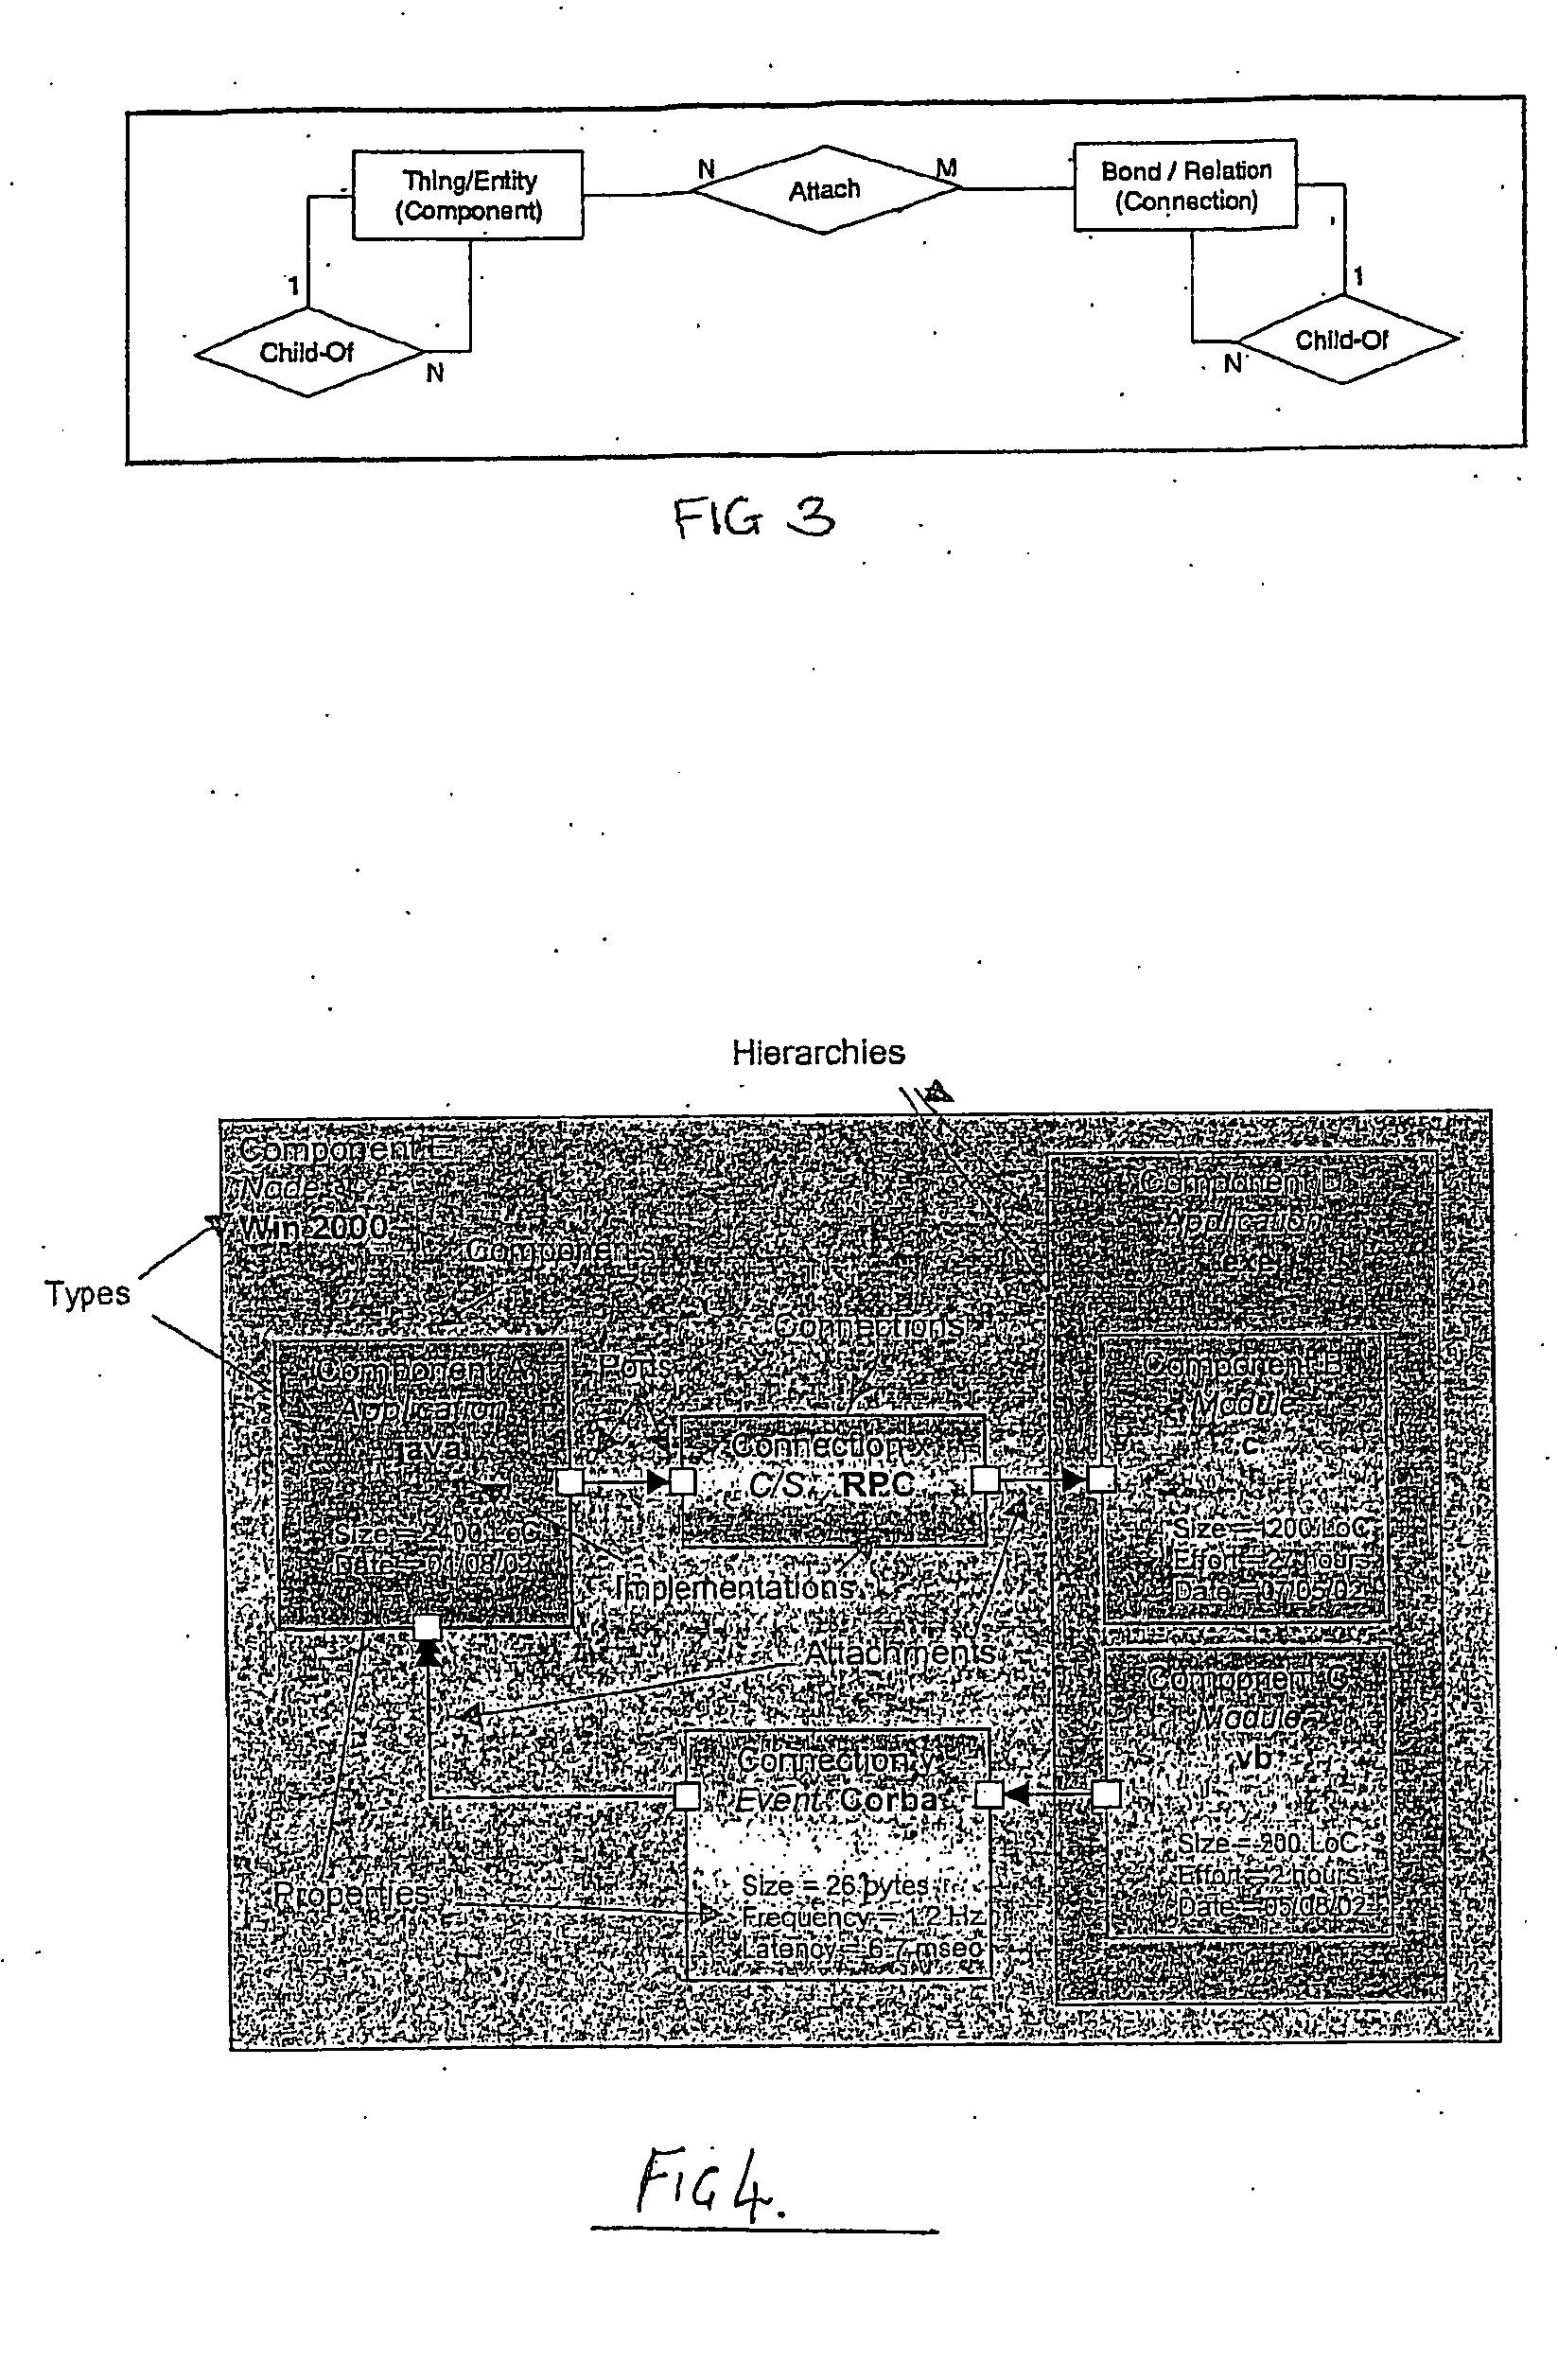 Method and apparatus for the analysis of complex systems